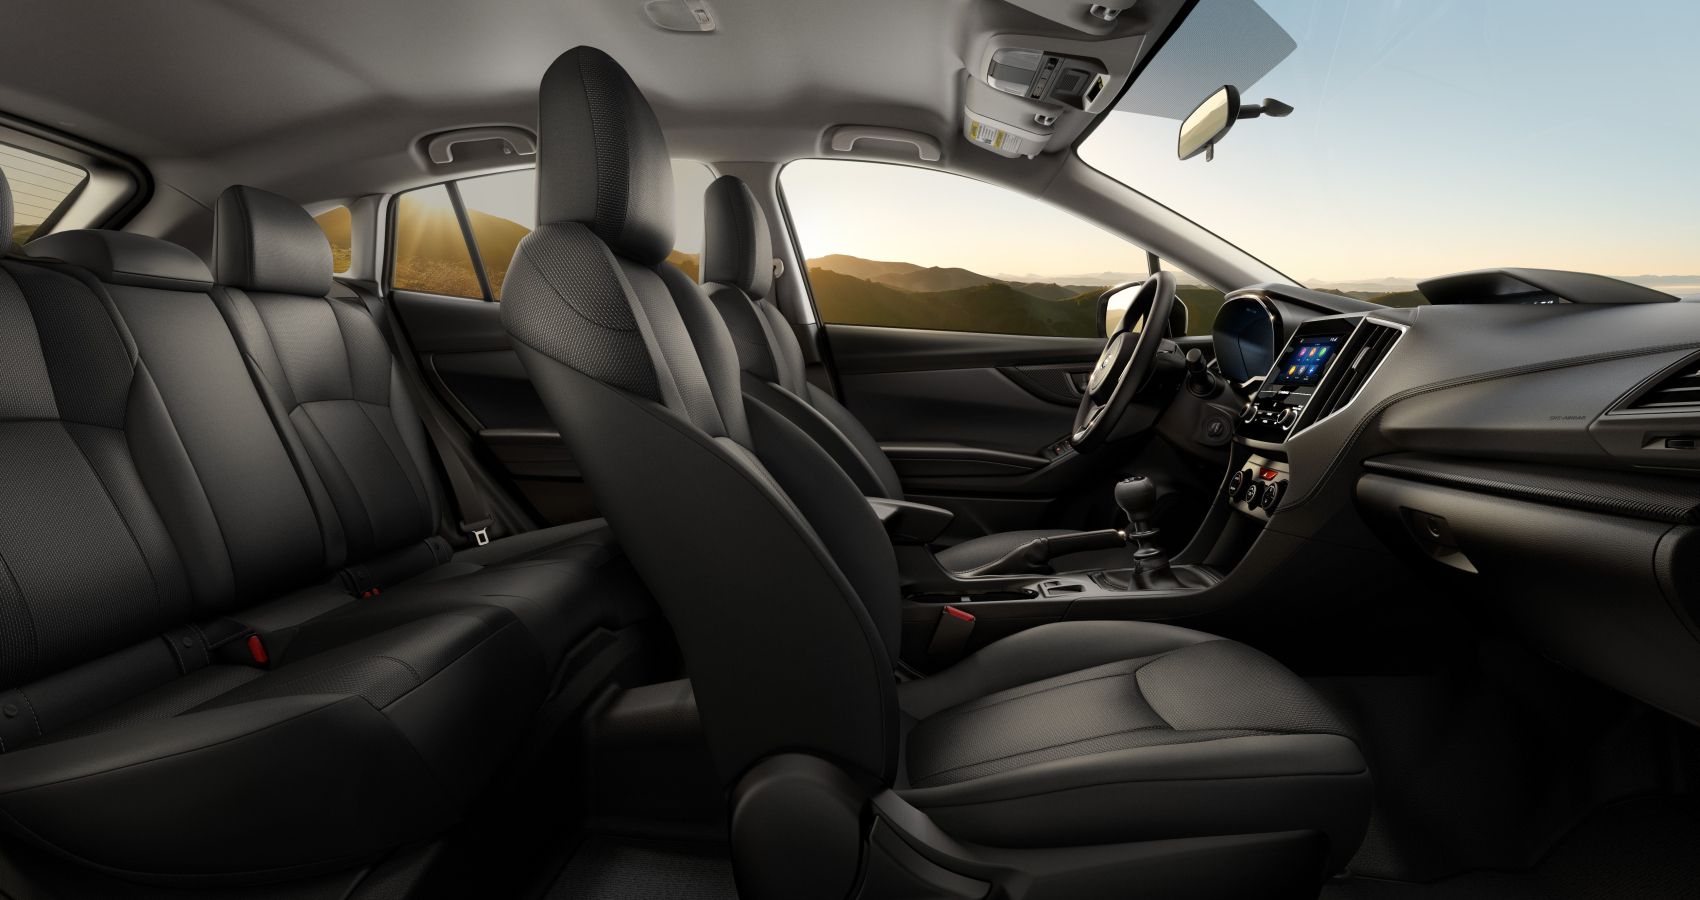 The 2023 Subaru Crosstrek packs a spacious, comfortable and a logically curated cabin.